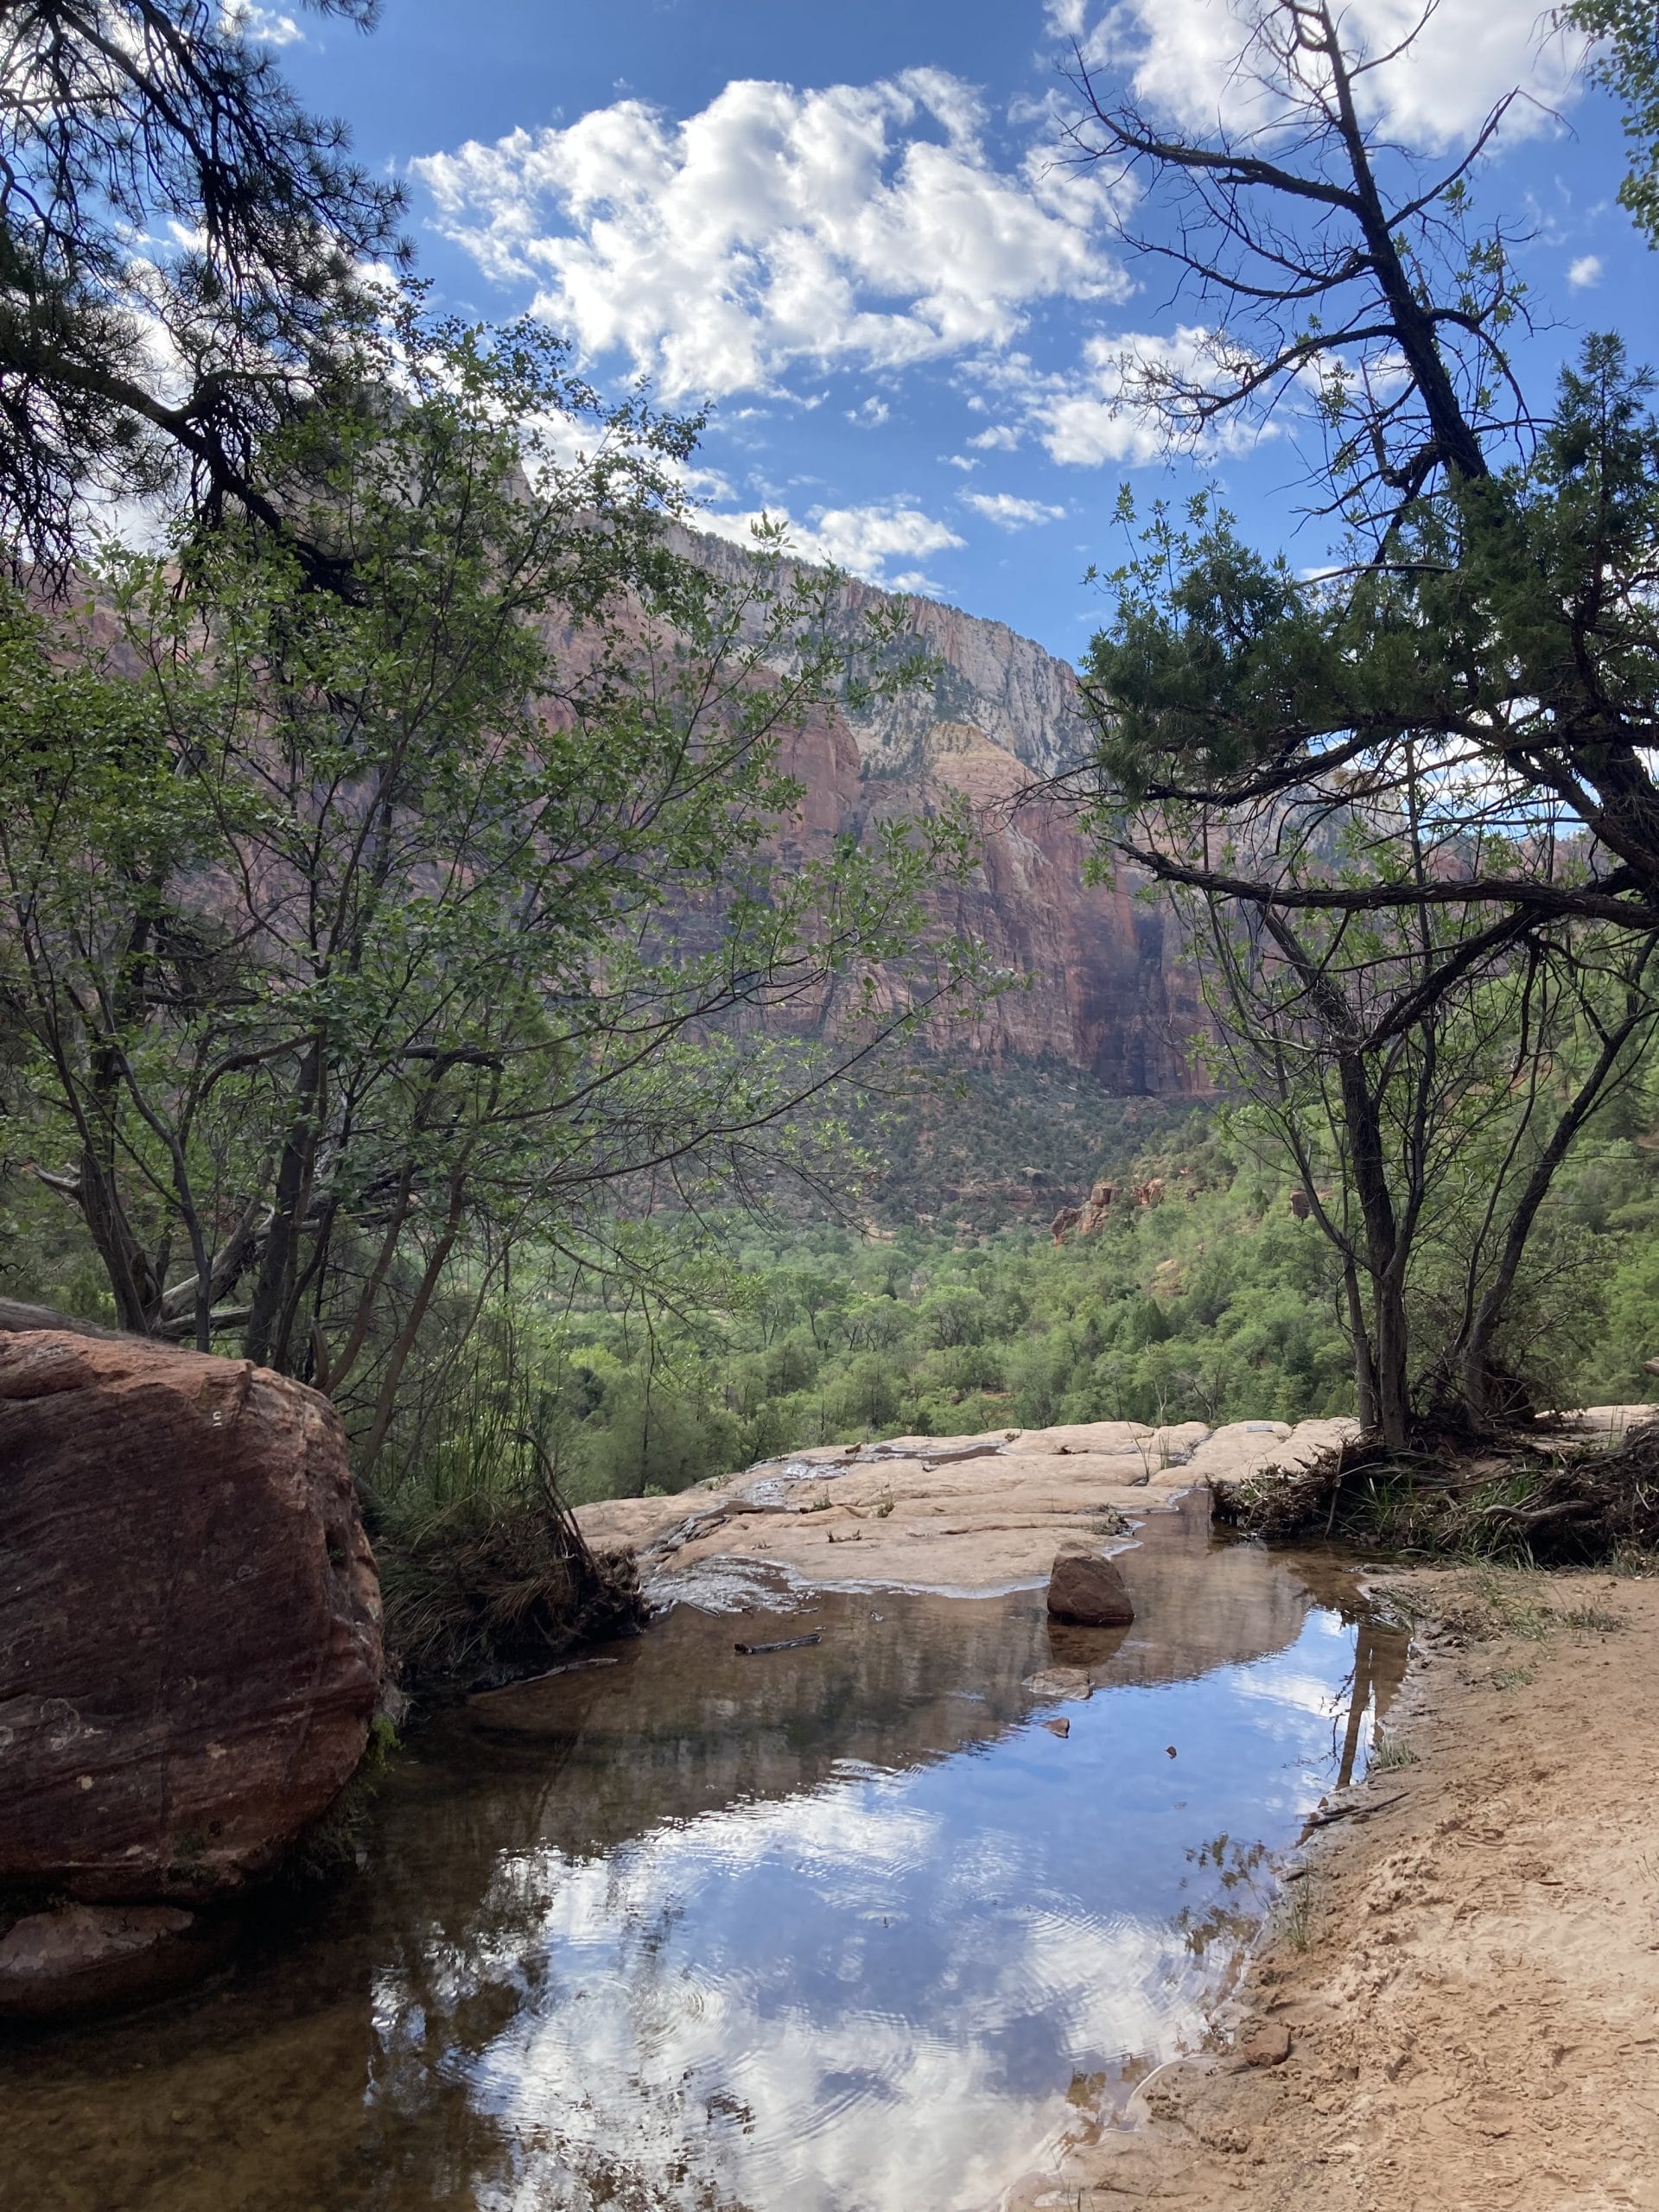 The view at the Middle Emerald Pool was outstanding.